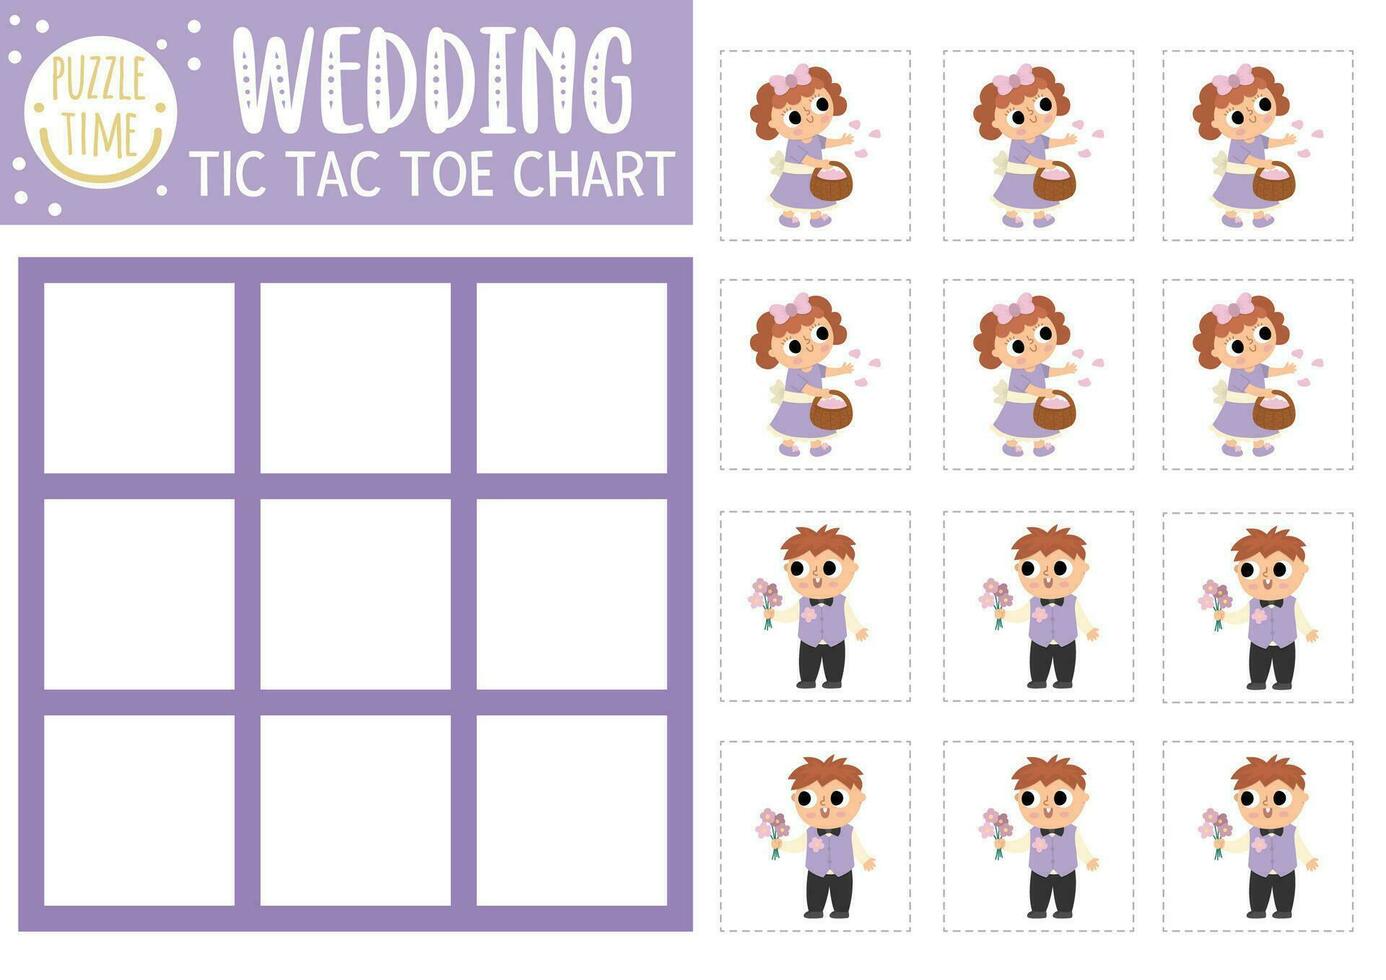 Vector wedding tic tac toe chart with boy and girl. Marriage ceremony board game playing field with cute characters. Funny family holiday printable worksheet. Noughts and crosses grid